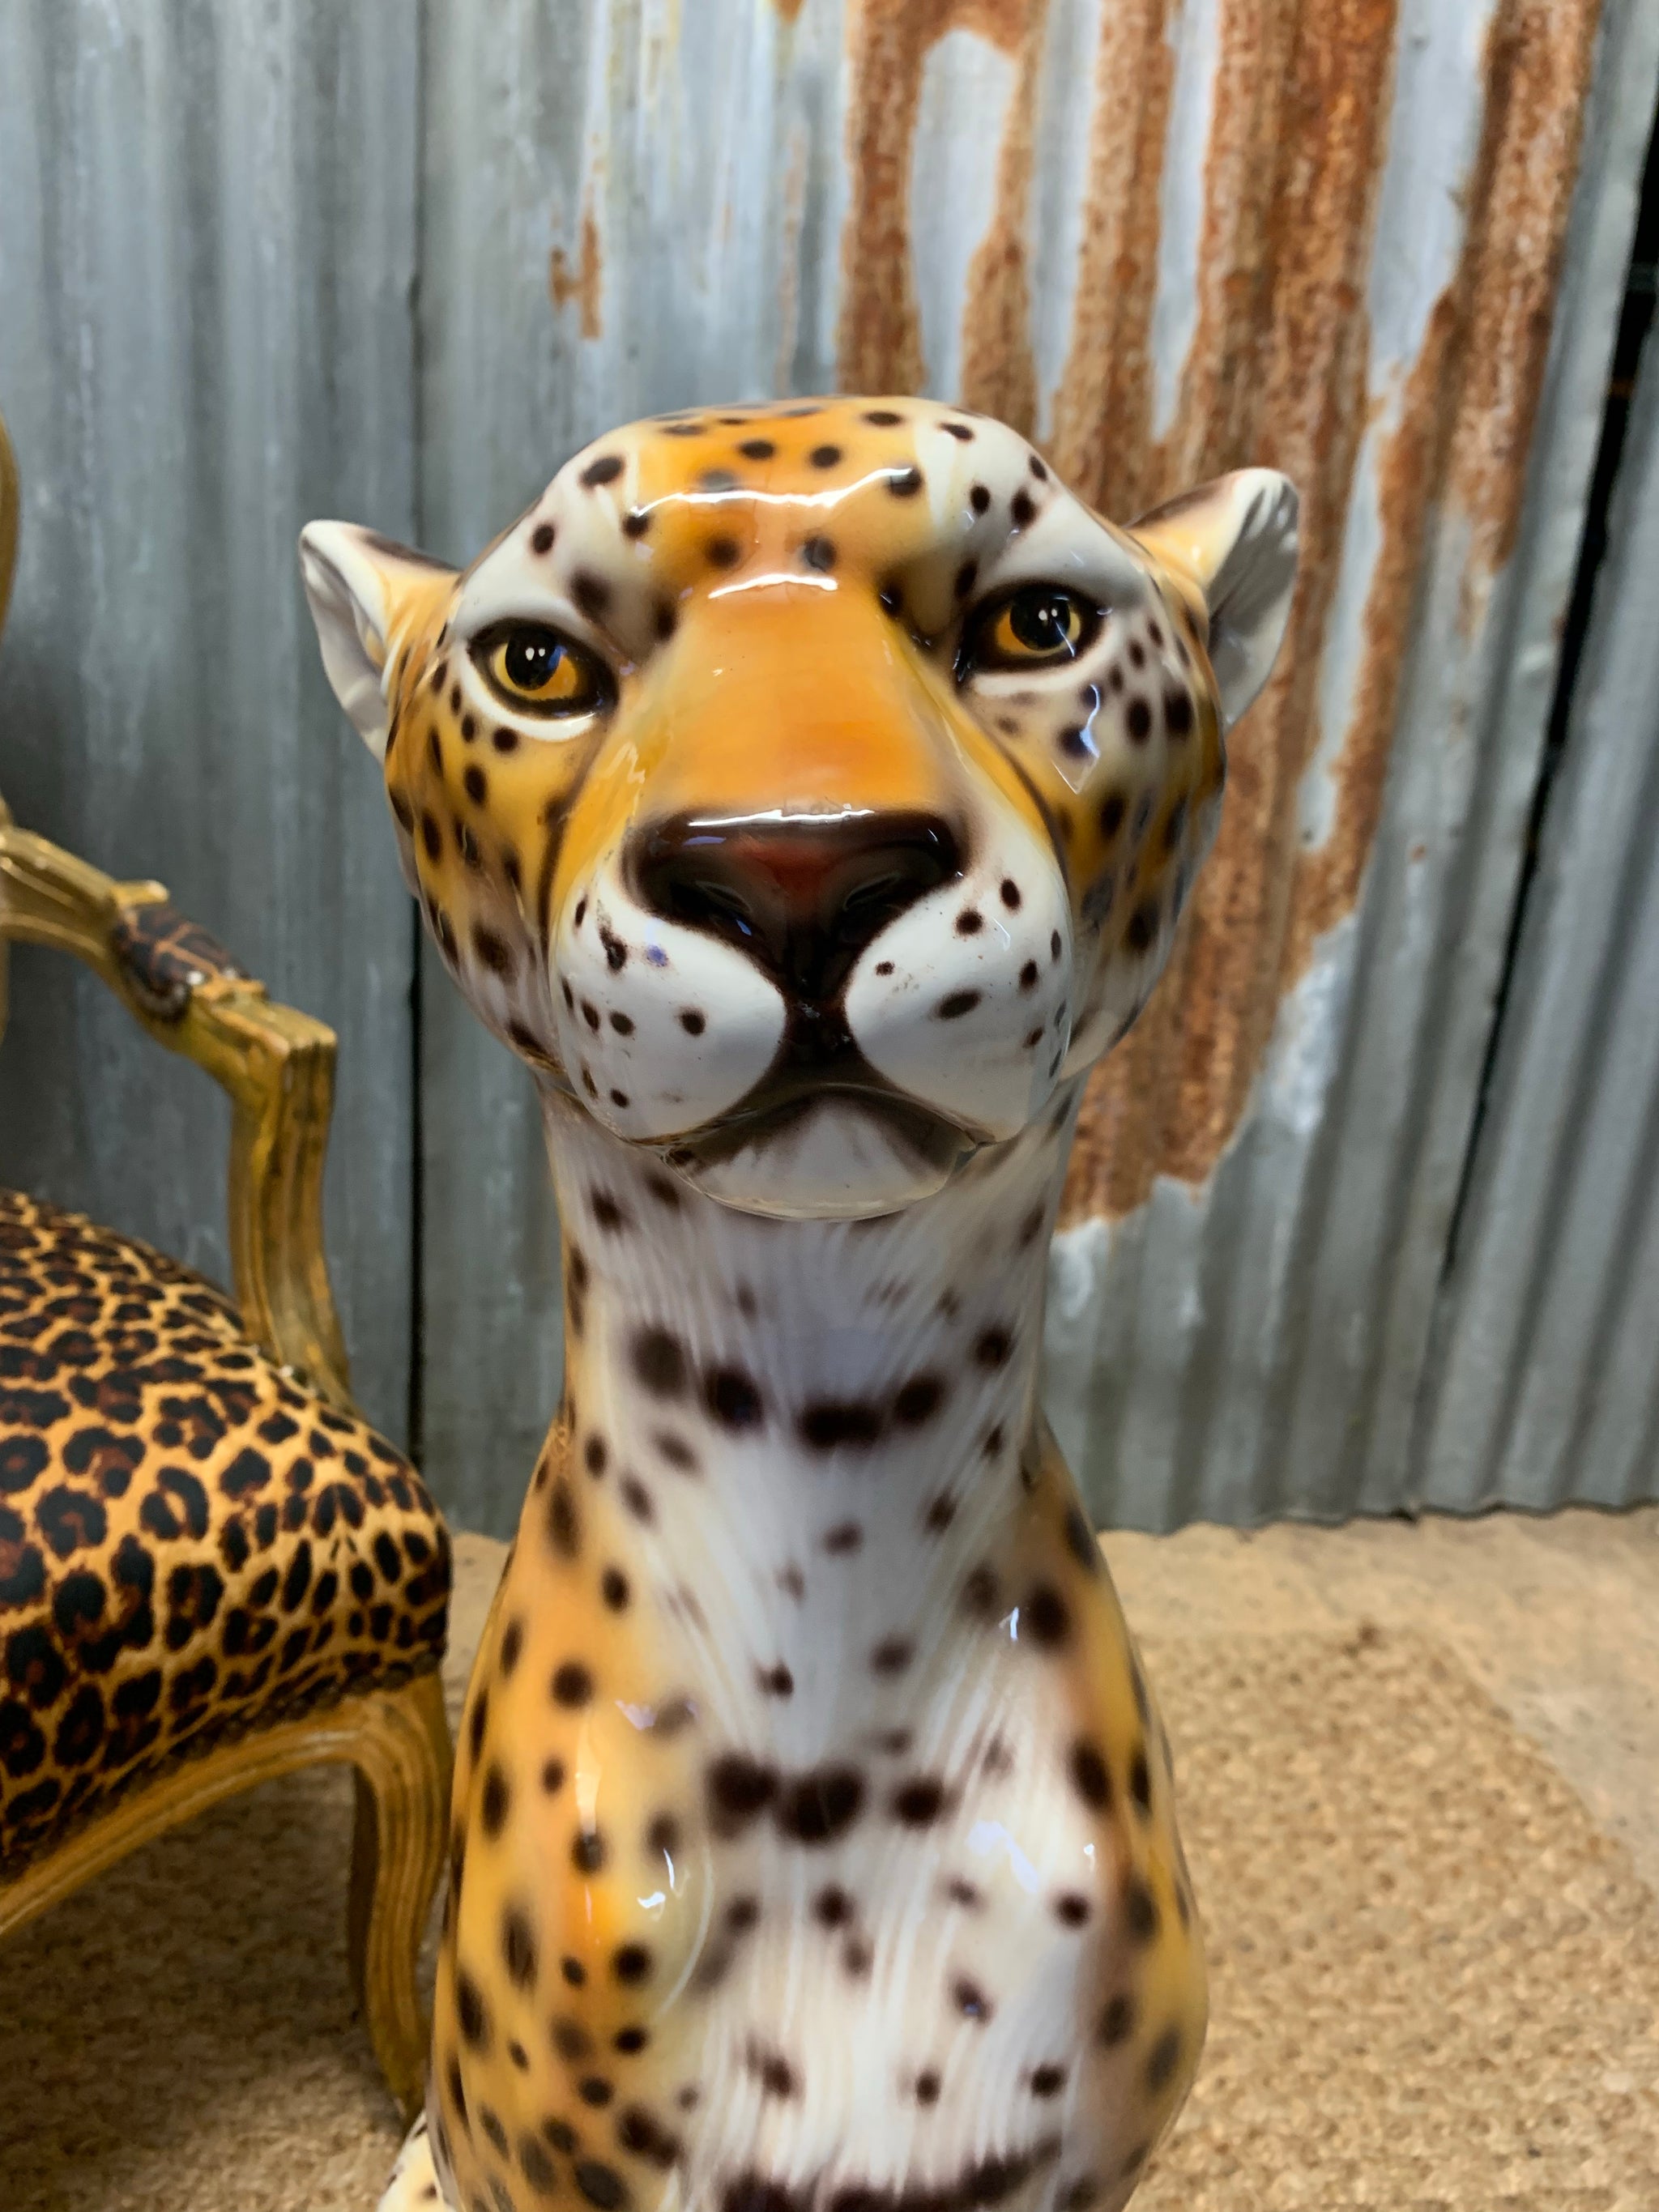 A very large mid 20th century cheetah statue - Belle and Beast